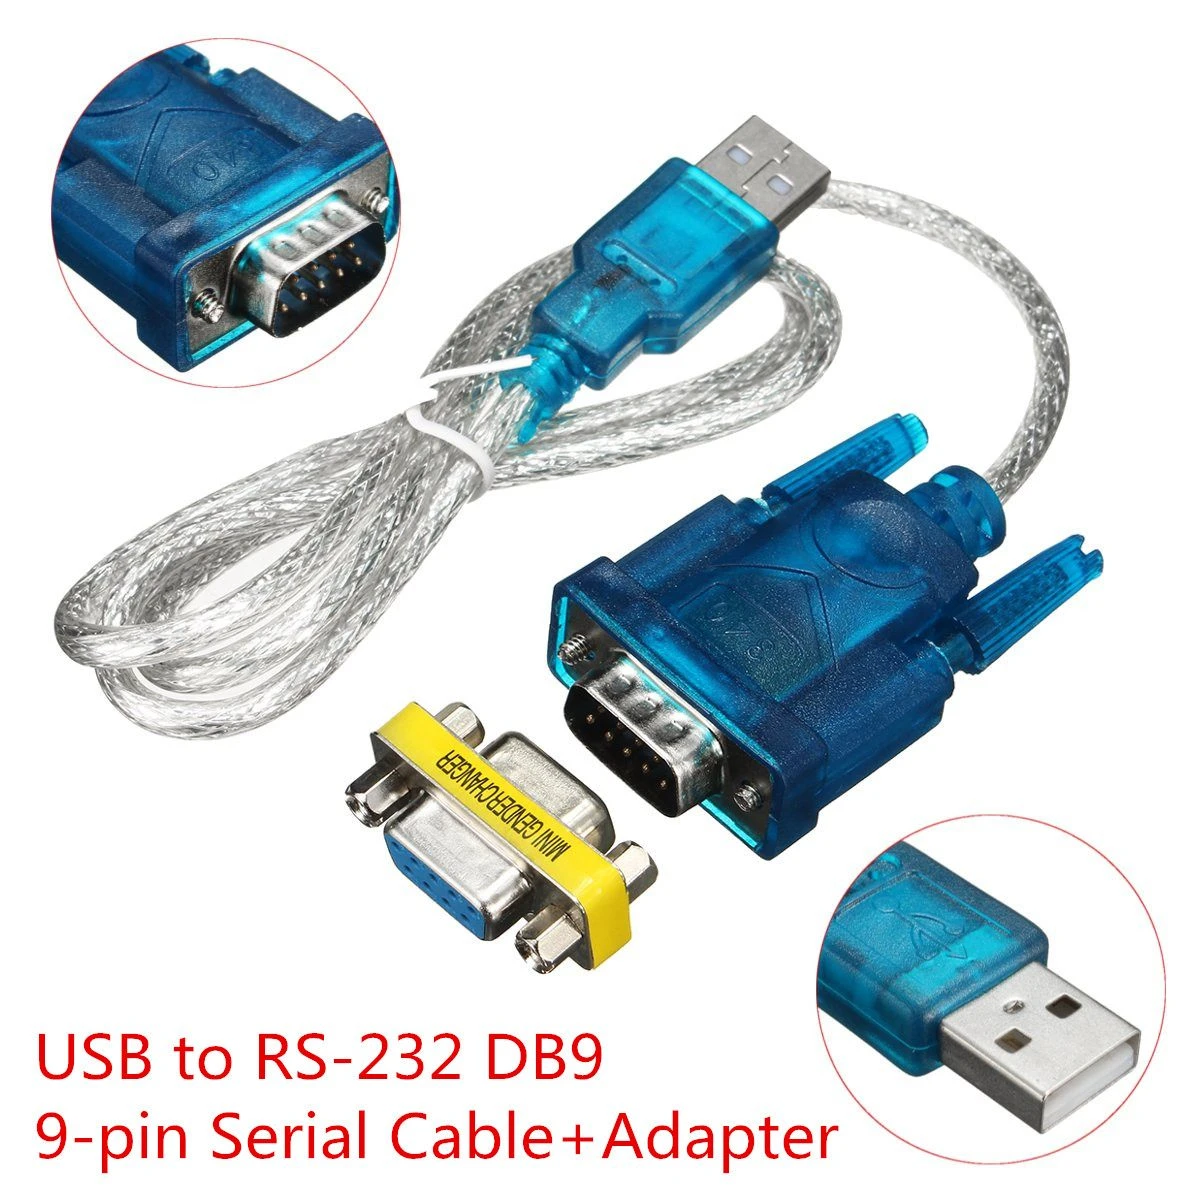 USB to RS232 Serial Port 9 Pin DB9 Cable Serial COM Port Adapter Convertor With Female Adapter Supports for Windows 8 No CD